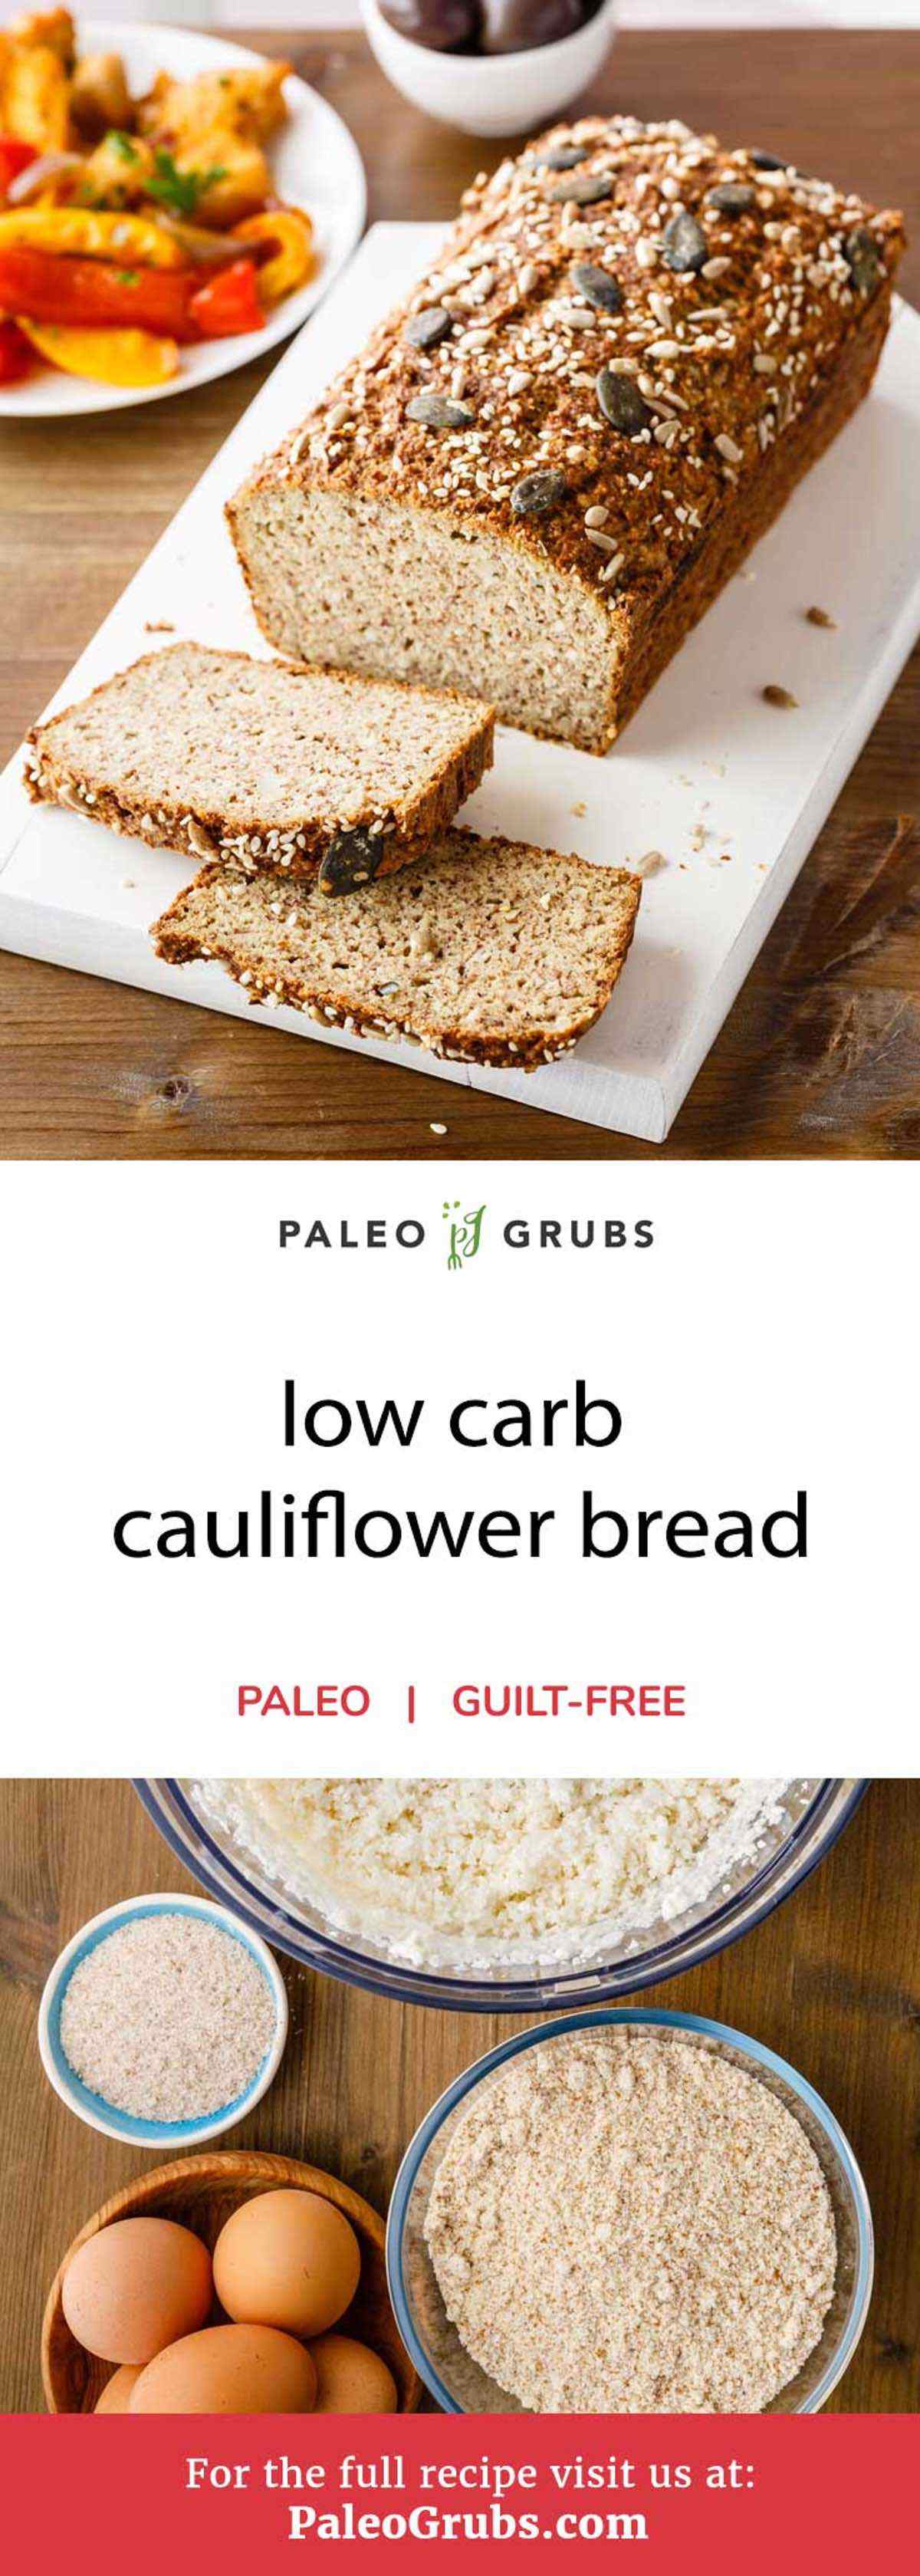 Thousands of people rely on bread to make a breakfast sandwich or quick lunch each and every day. Anyone following a paleo diet doesn’t have to be left out from that thanks to this low carb cauliflower bread recipe. It’s full of healthy ingredients that make it gluten-free and 100% paleo-friendly.